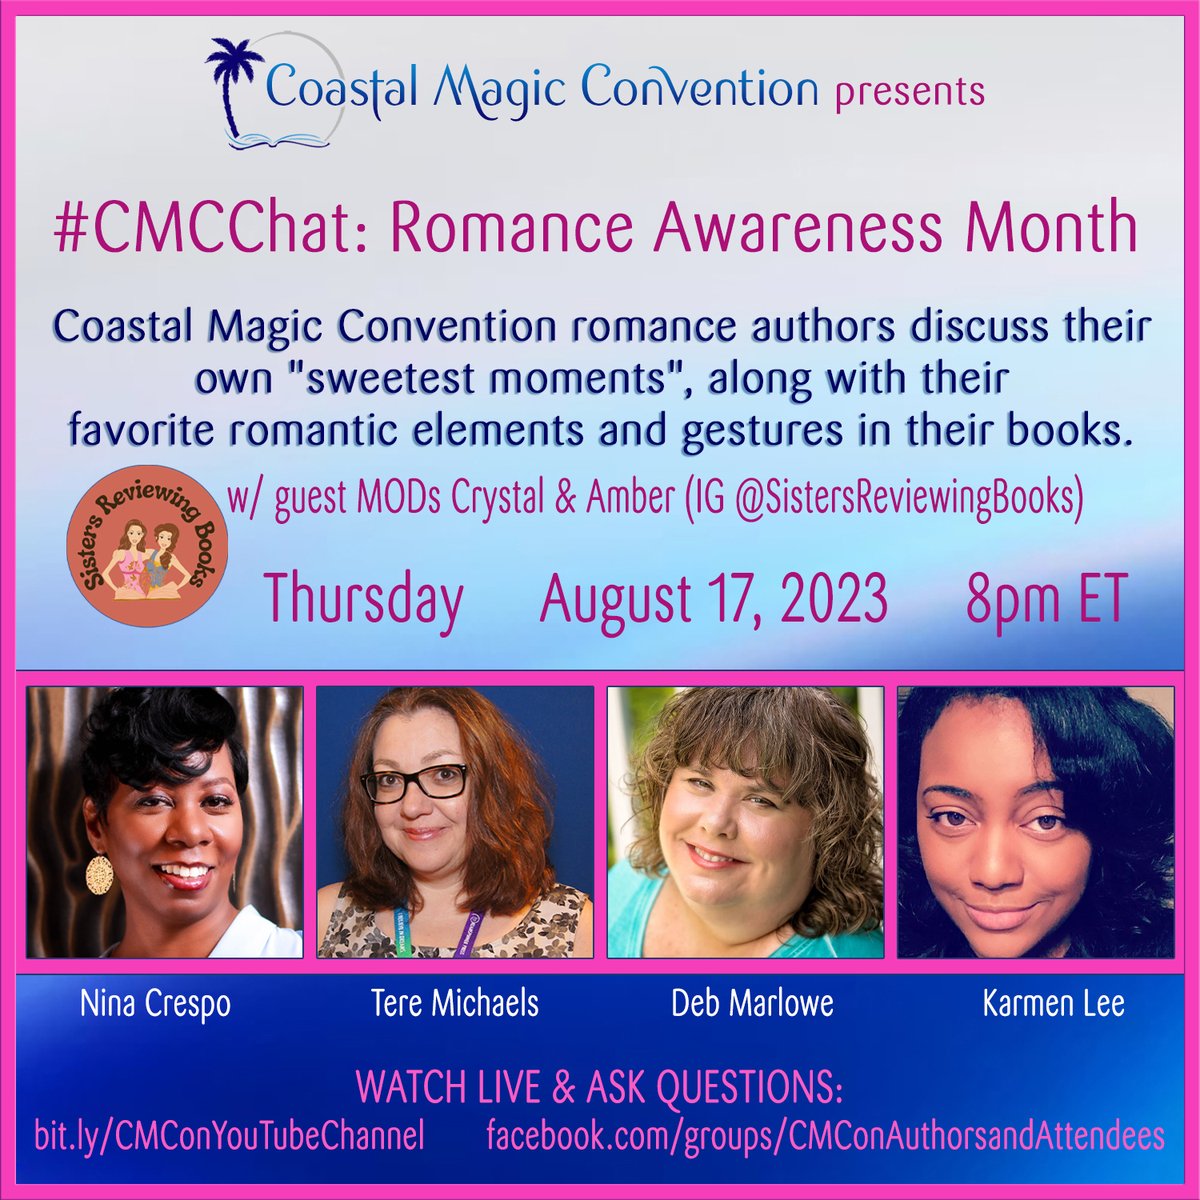 Tonight's the night!!
#CMCon24 authors will be discussing all things ROMANCE for National Romance Awareness Month! We'd love for you to join us. Leave your comments & ask questions in real time on the video thread facebook.com/groups/CMConAu…. Tonight at 8pm ET!!